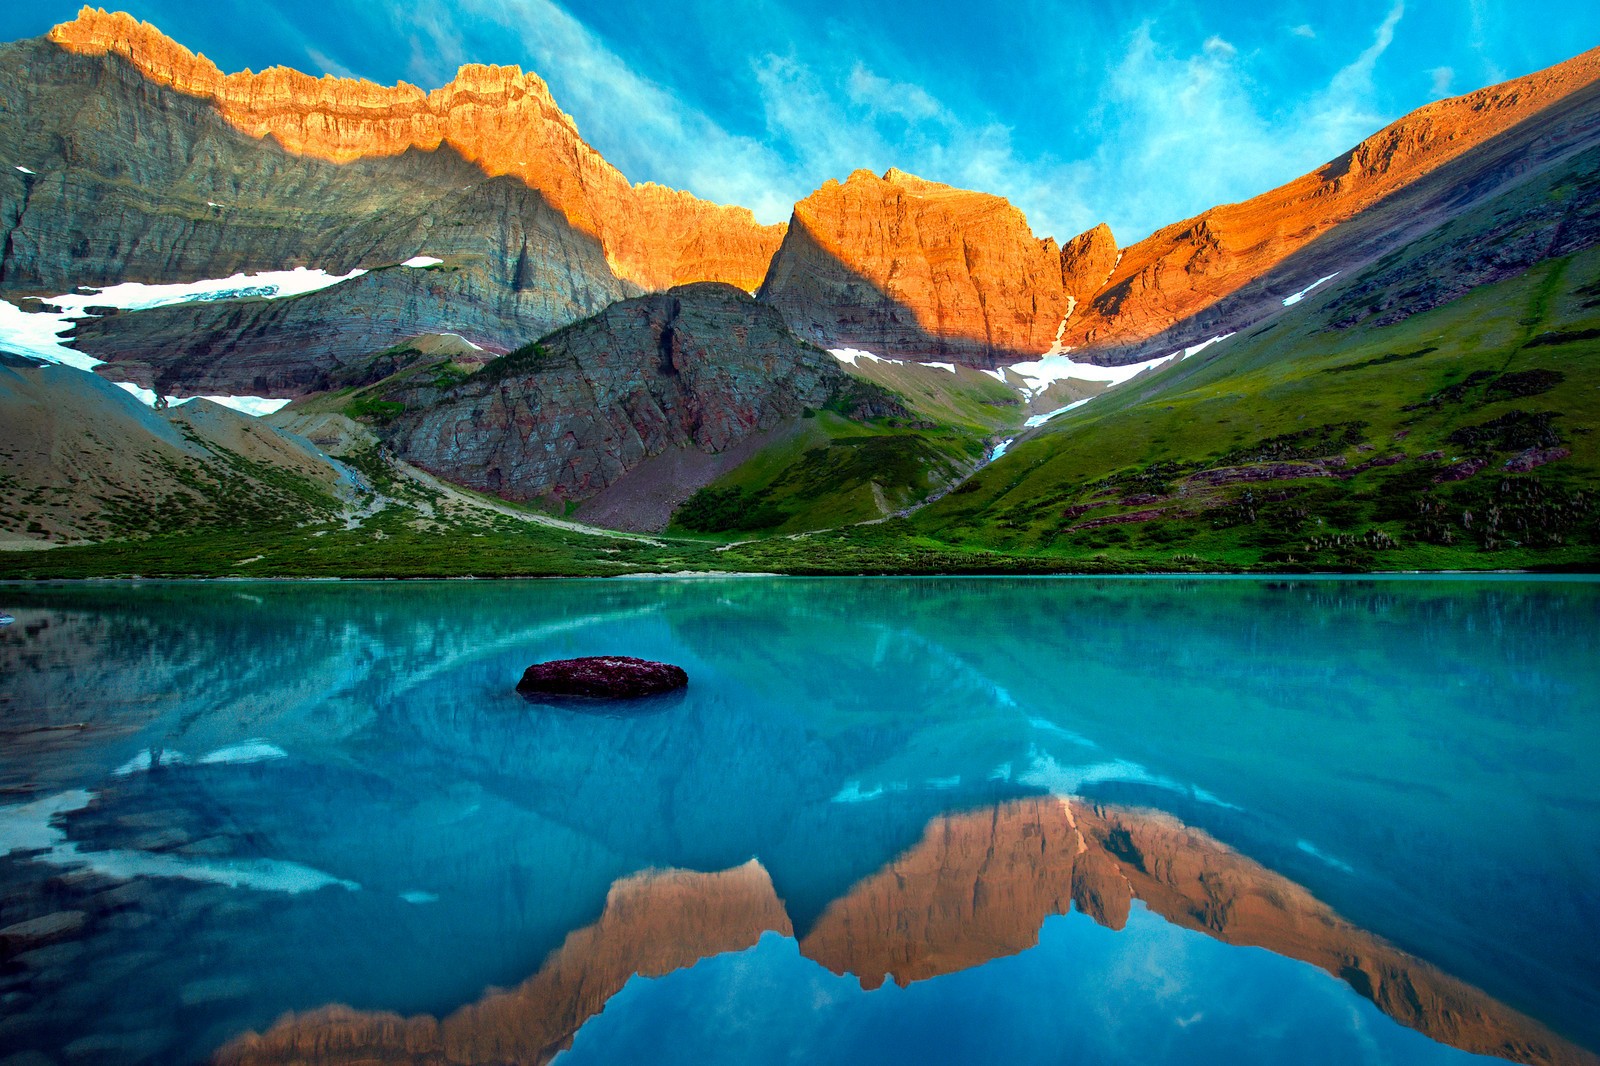 General 1600x1066 nature landscape Glacier National Park Montana lake mountains sunset turquoise water reflection grass snow USA